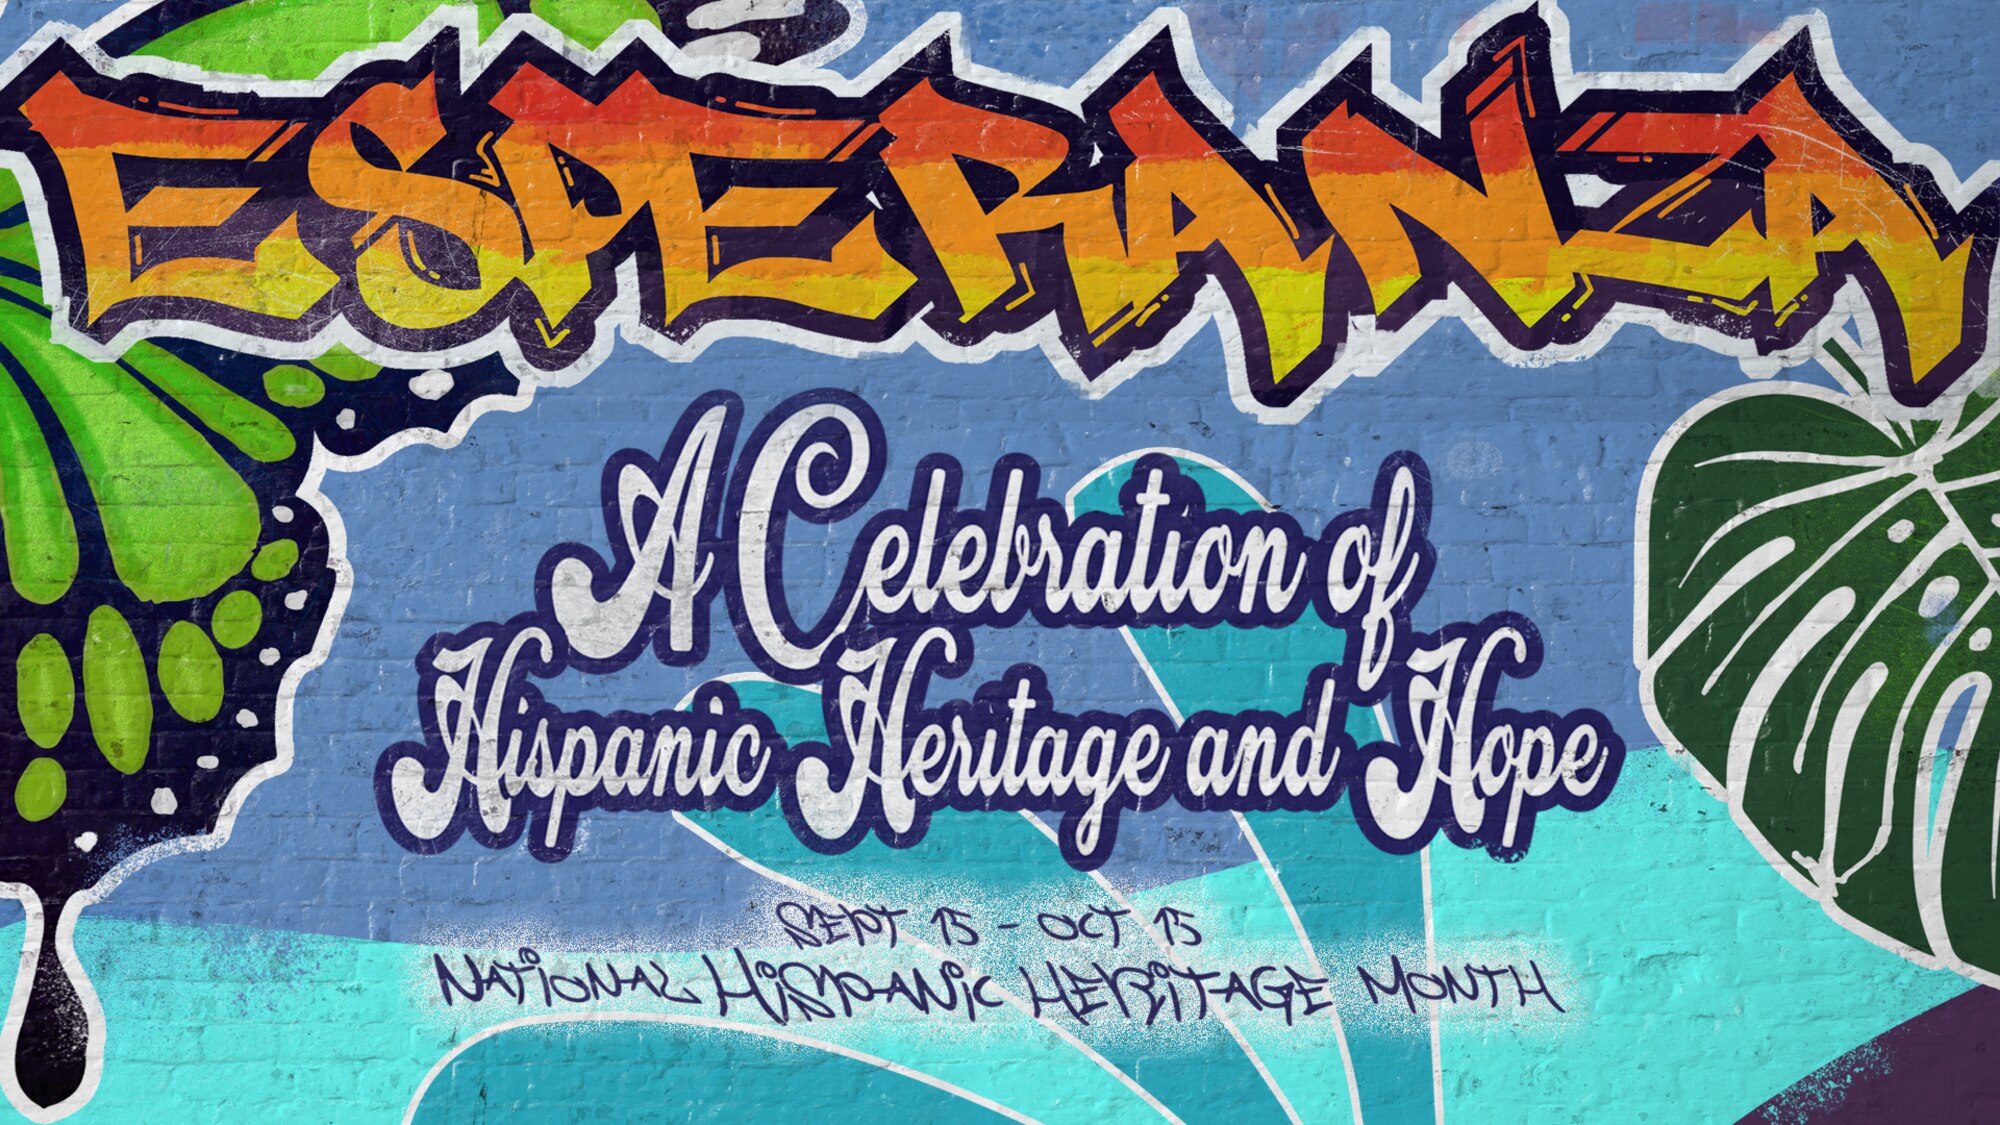 Graffiti Mural Art on a brick wall texture. Centered in the middle of the poster is the event theme. It reads: Esperanza: A Celebration of Hispanic Heritage and Hope.